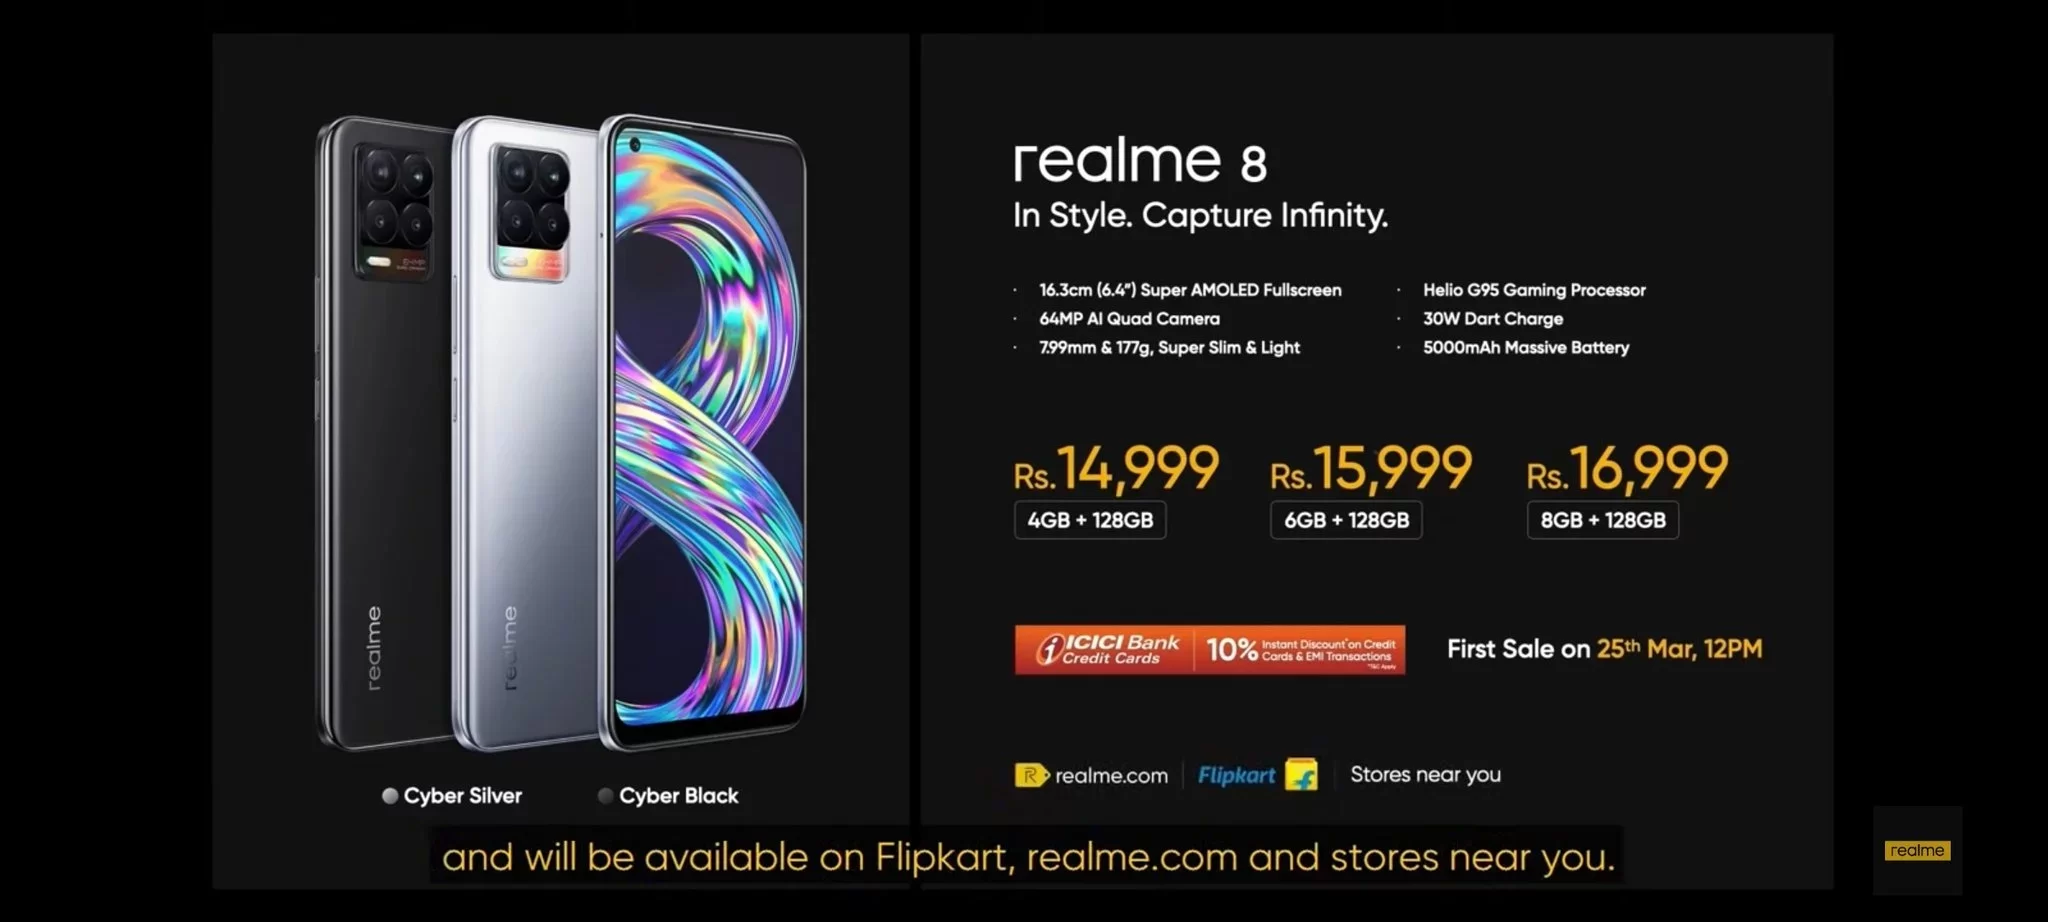 Realme 8 Pro with 108MP quad rear camera setup launched: Price, Specifications